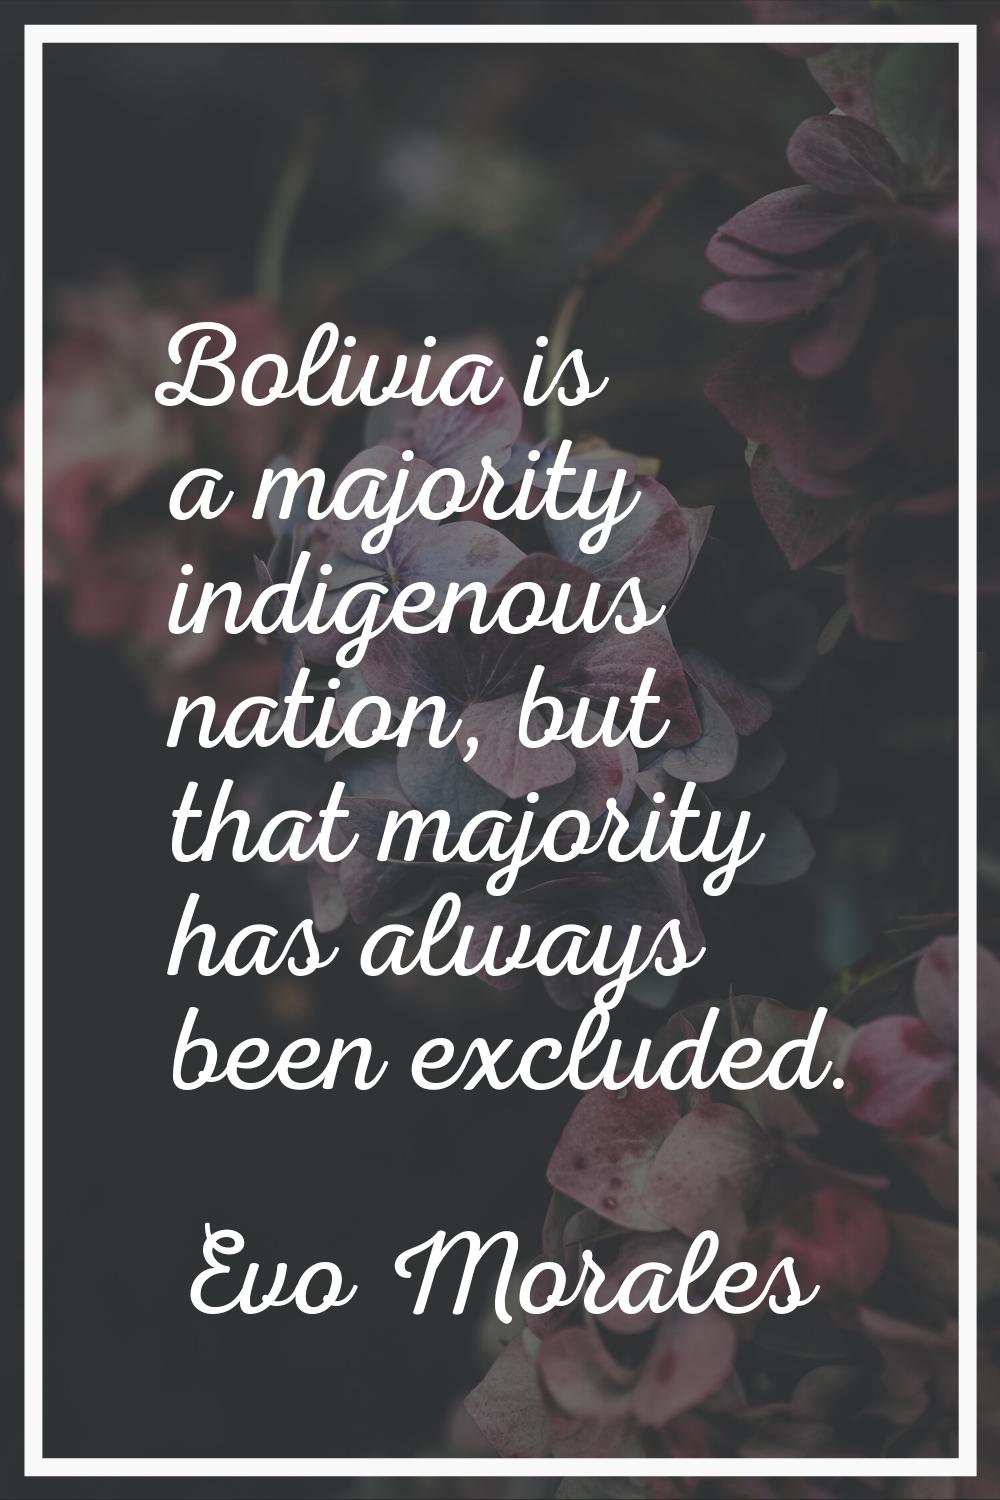 Bolivia is a majority indigenous nation, but that majority has always been excluded.